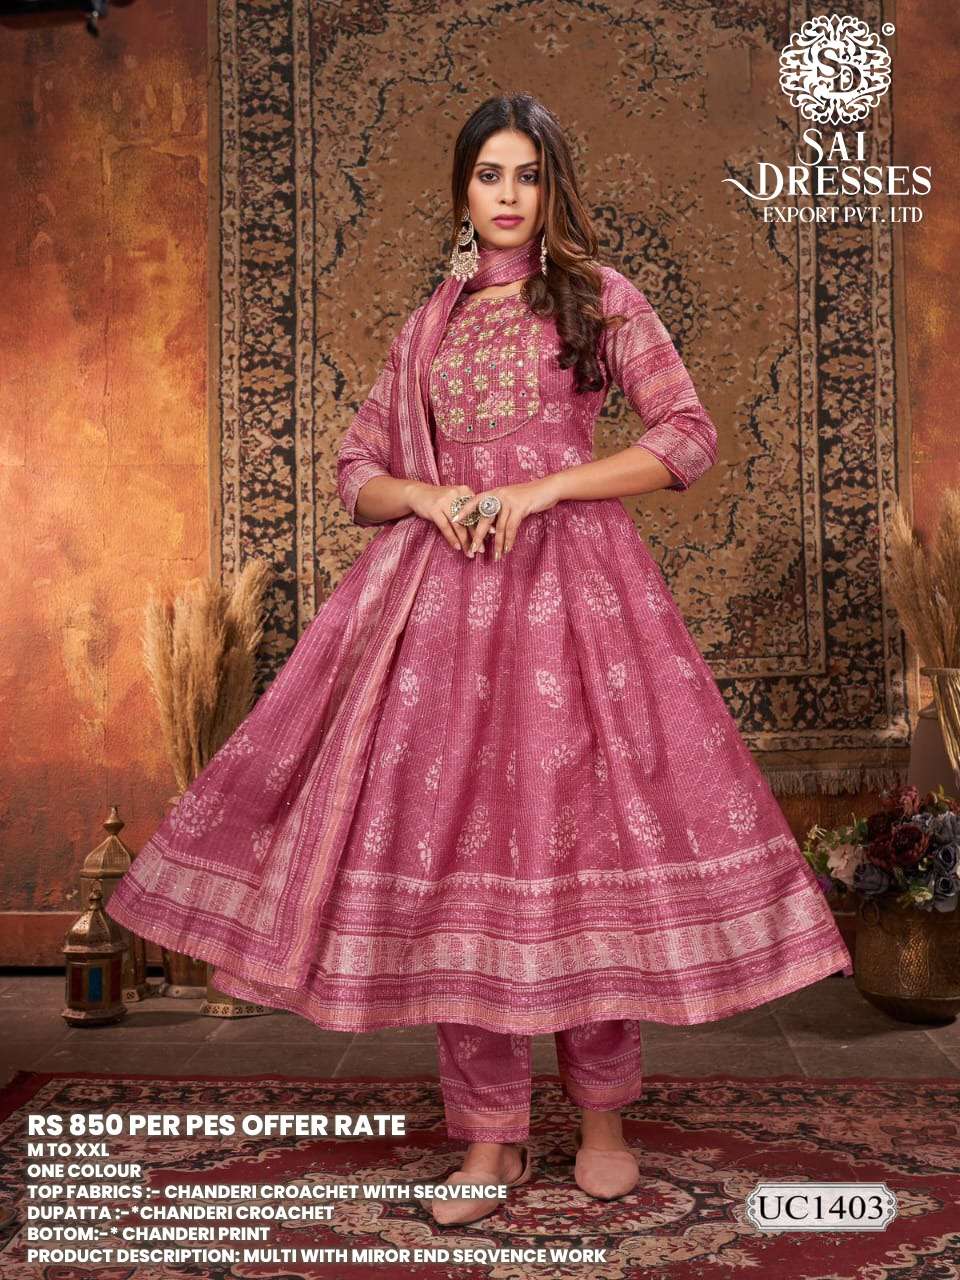 SAI DRESSES PRESENT D.NO UC1403 READY TO EXCLUSIVE WEAR ANARKALI STYLE DESIGNER 3 PIECE COMBO SUITS IN WHOLESALE RATE IN SURAT